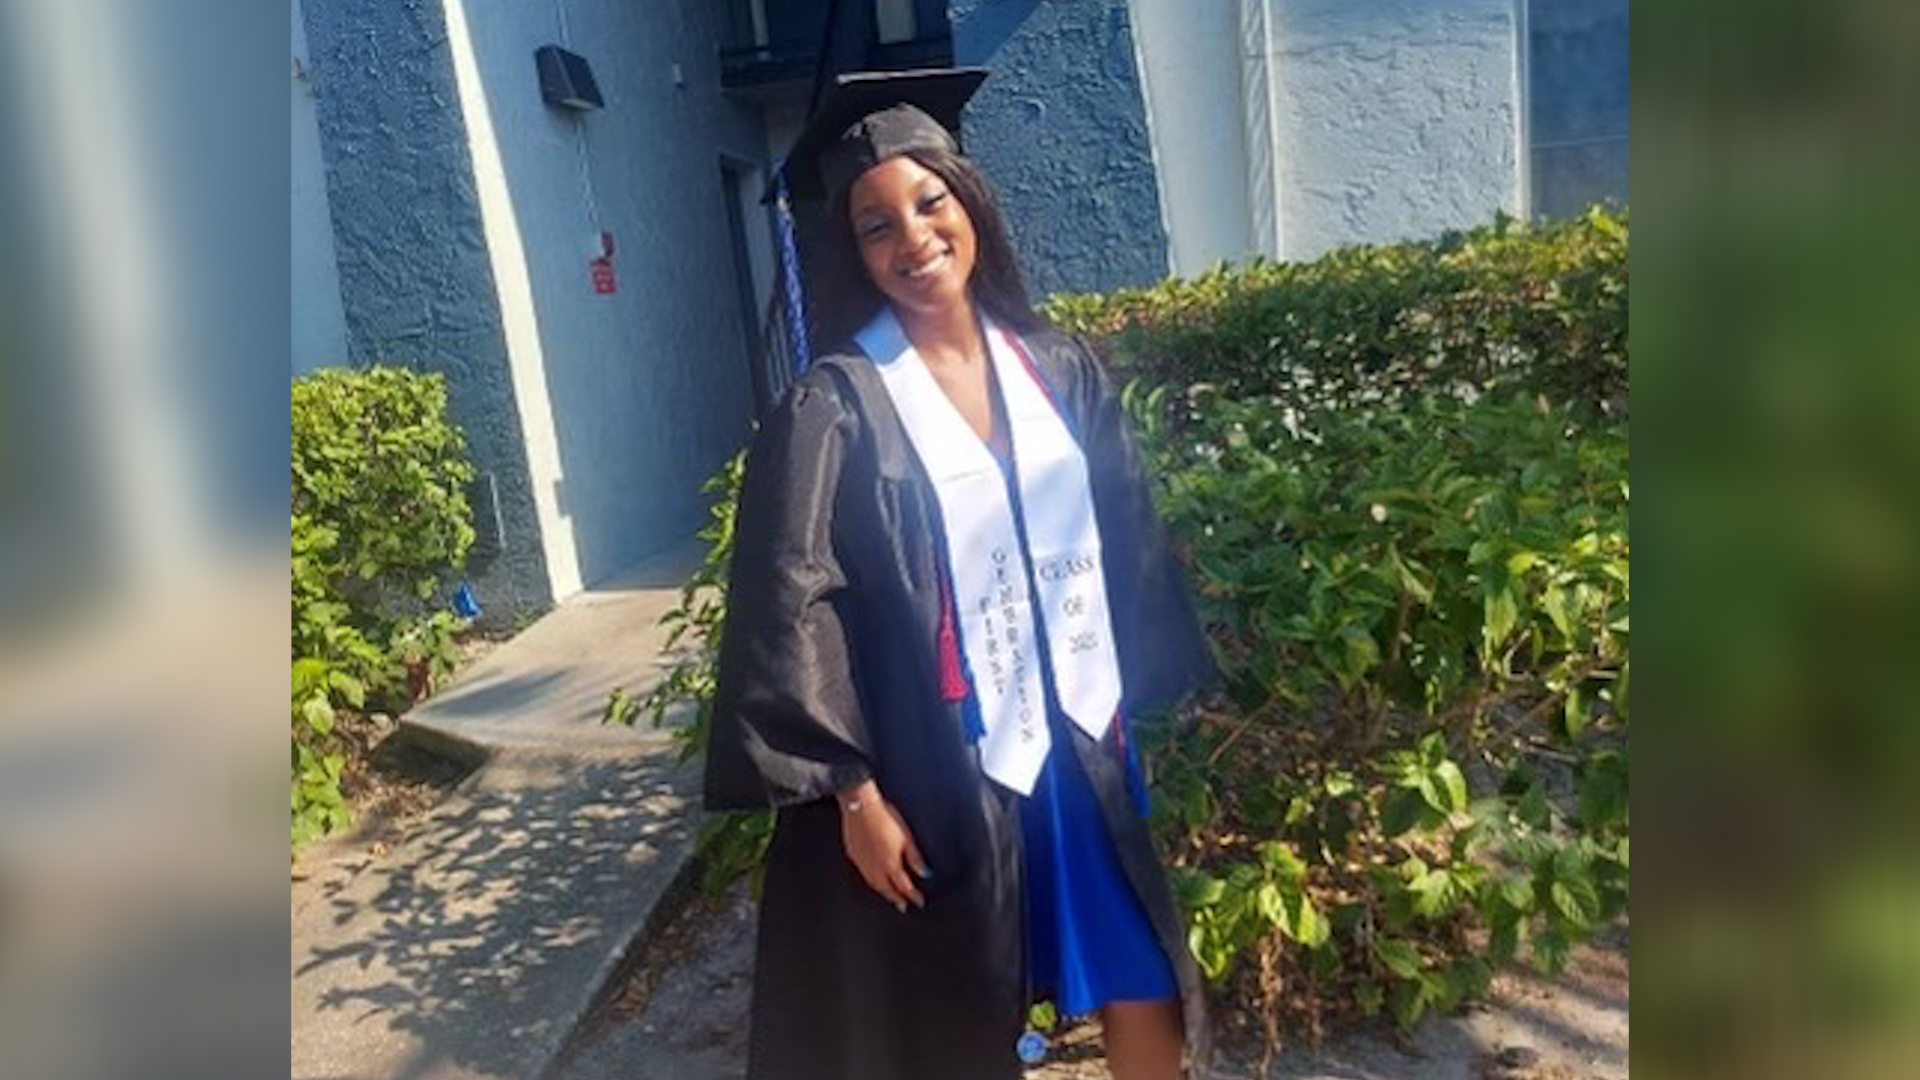 First generation college grad uses psychology degree from Keiser University to care for children with disabilities